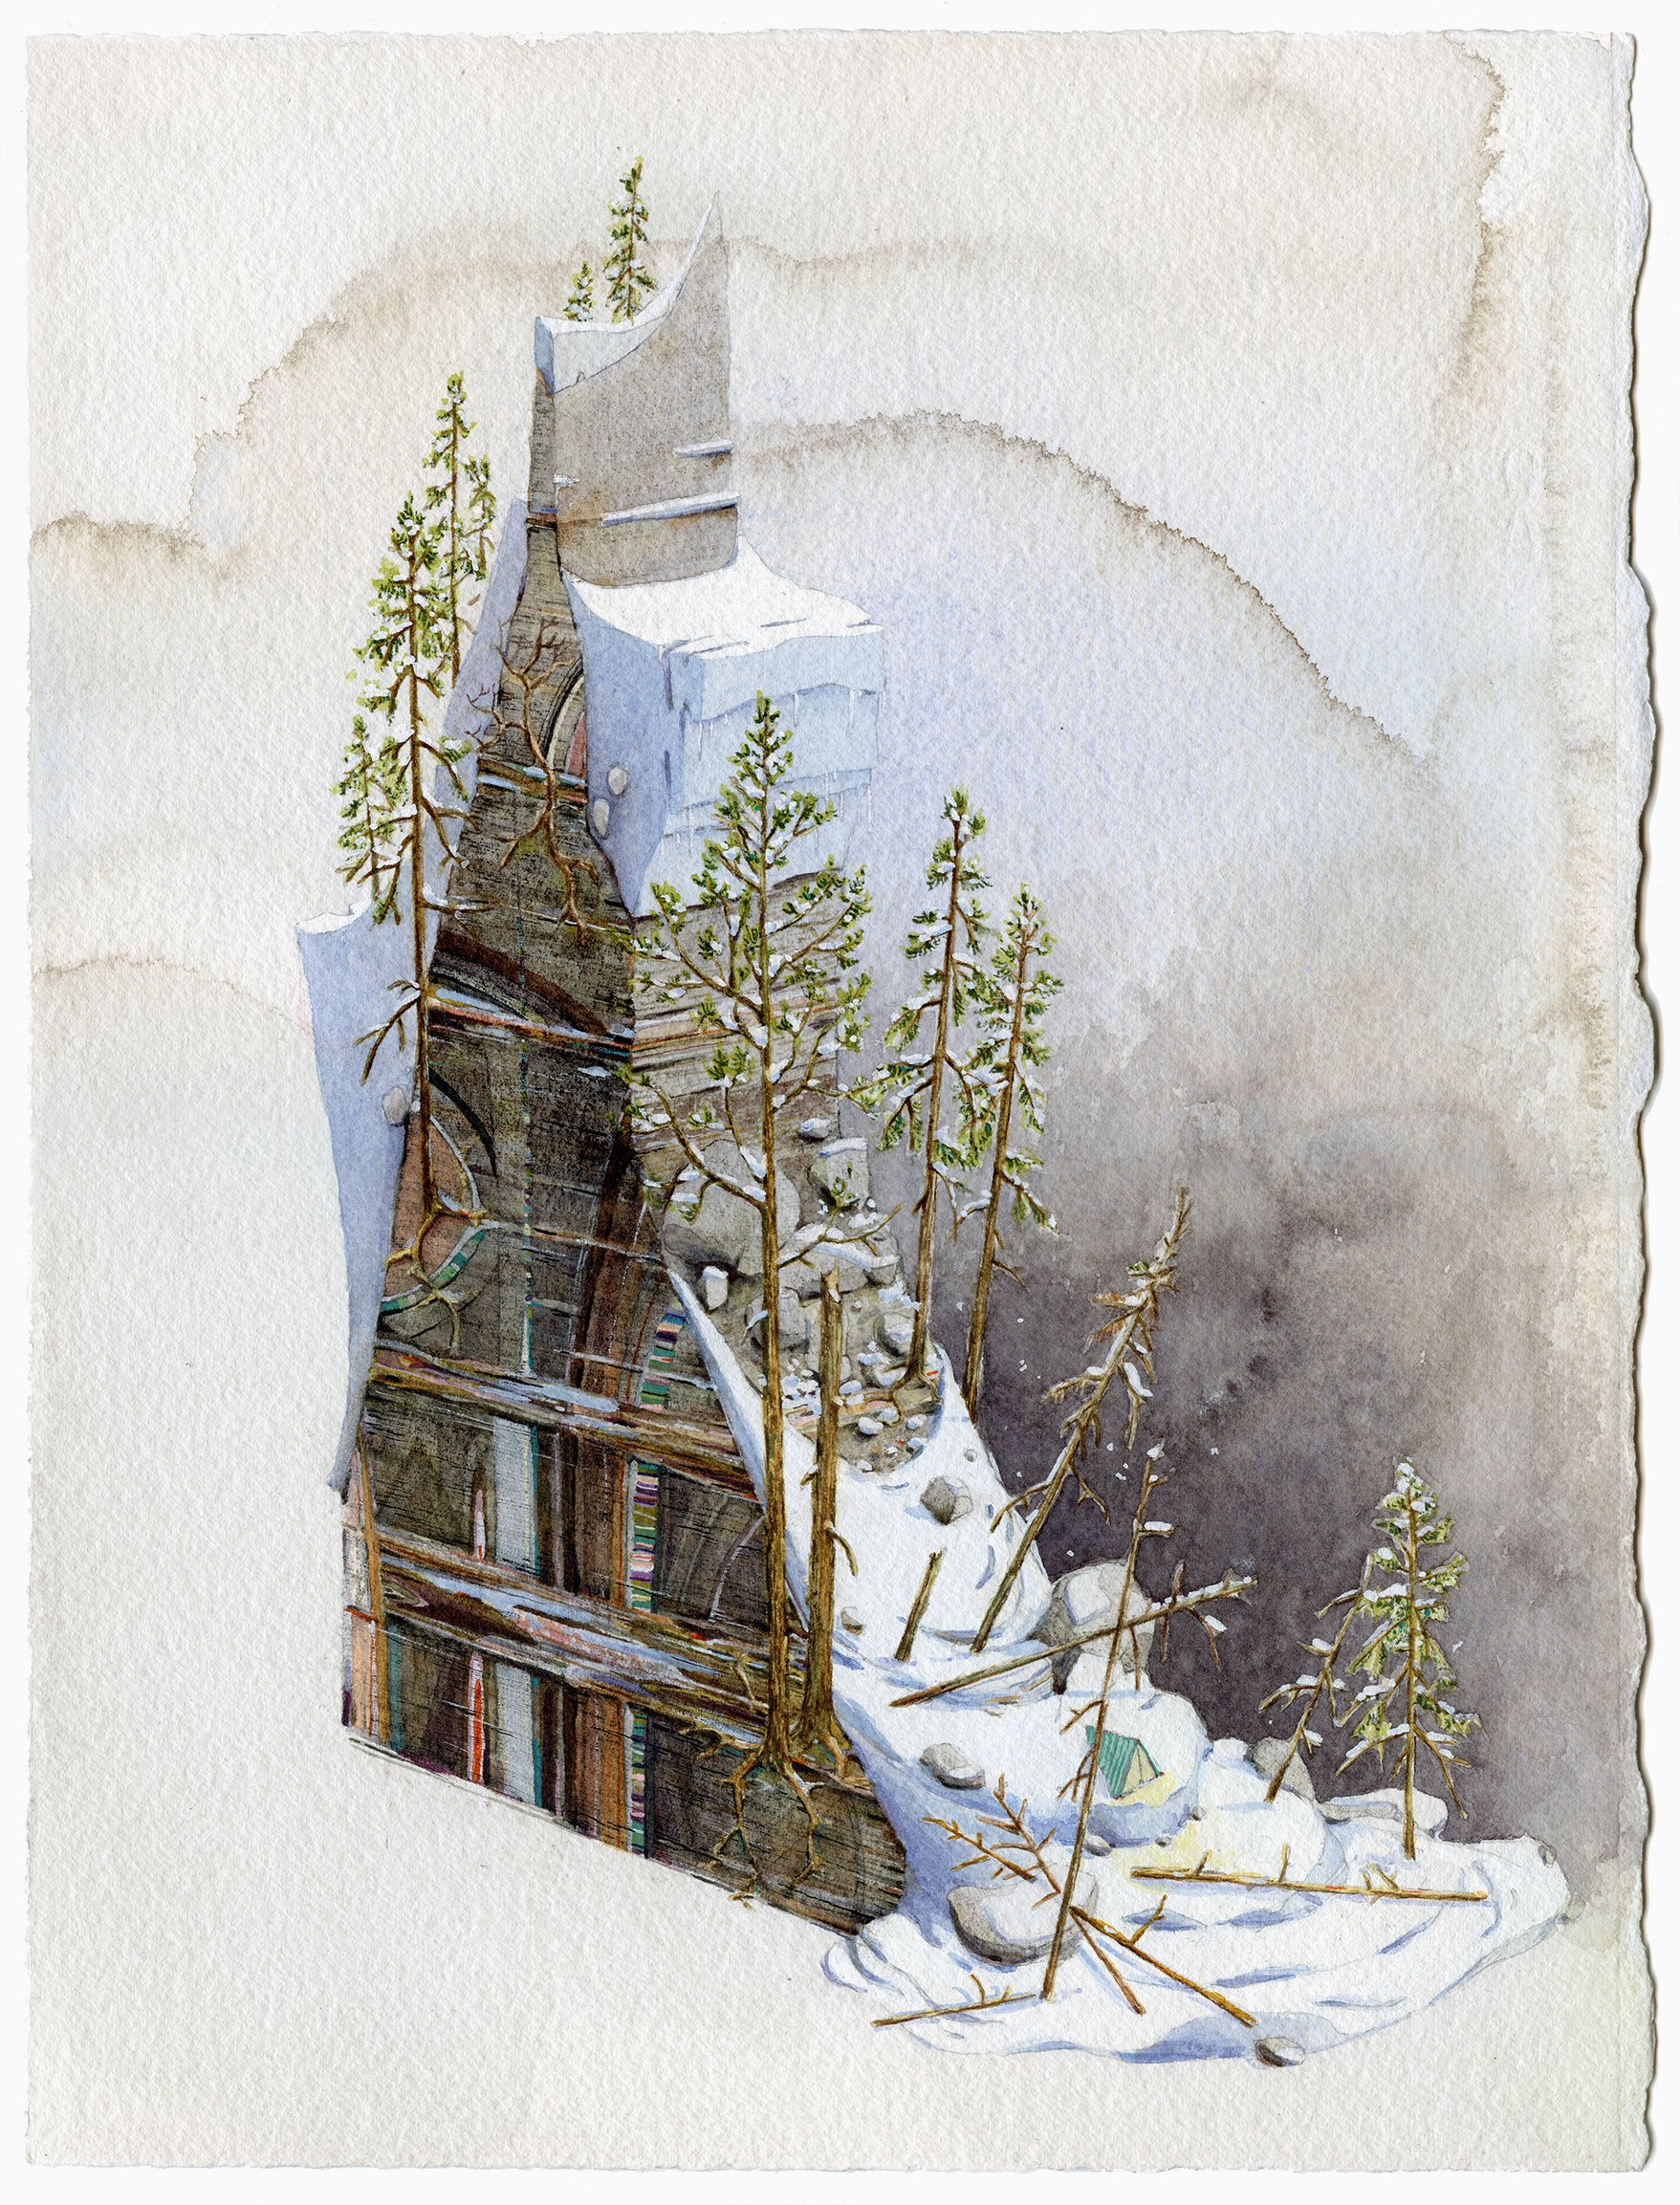 "Snowfall" / Watercolor and gouache on paper / 15"X11"